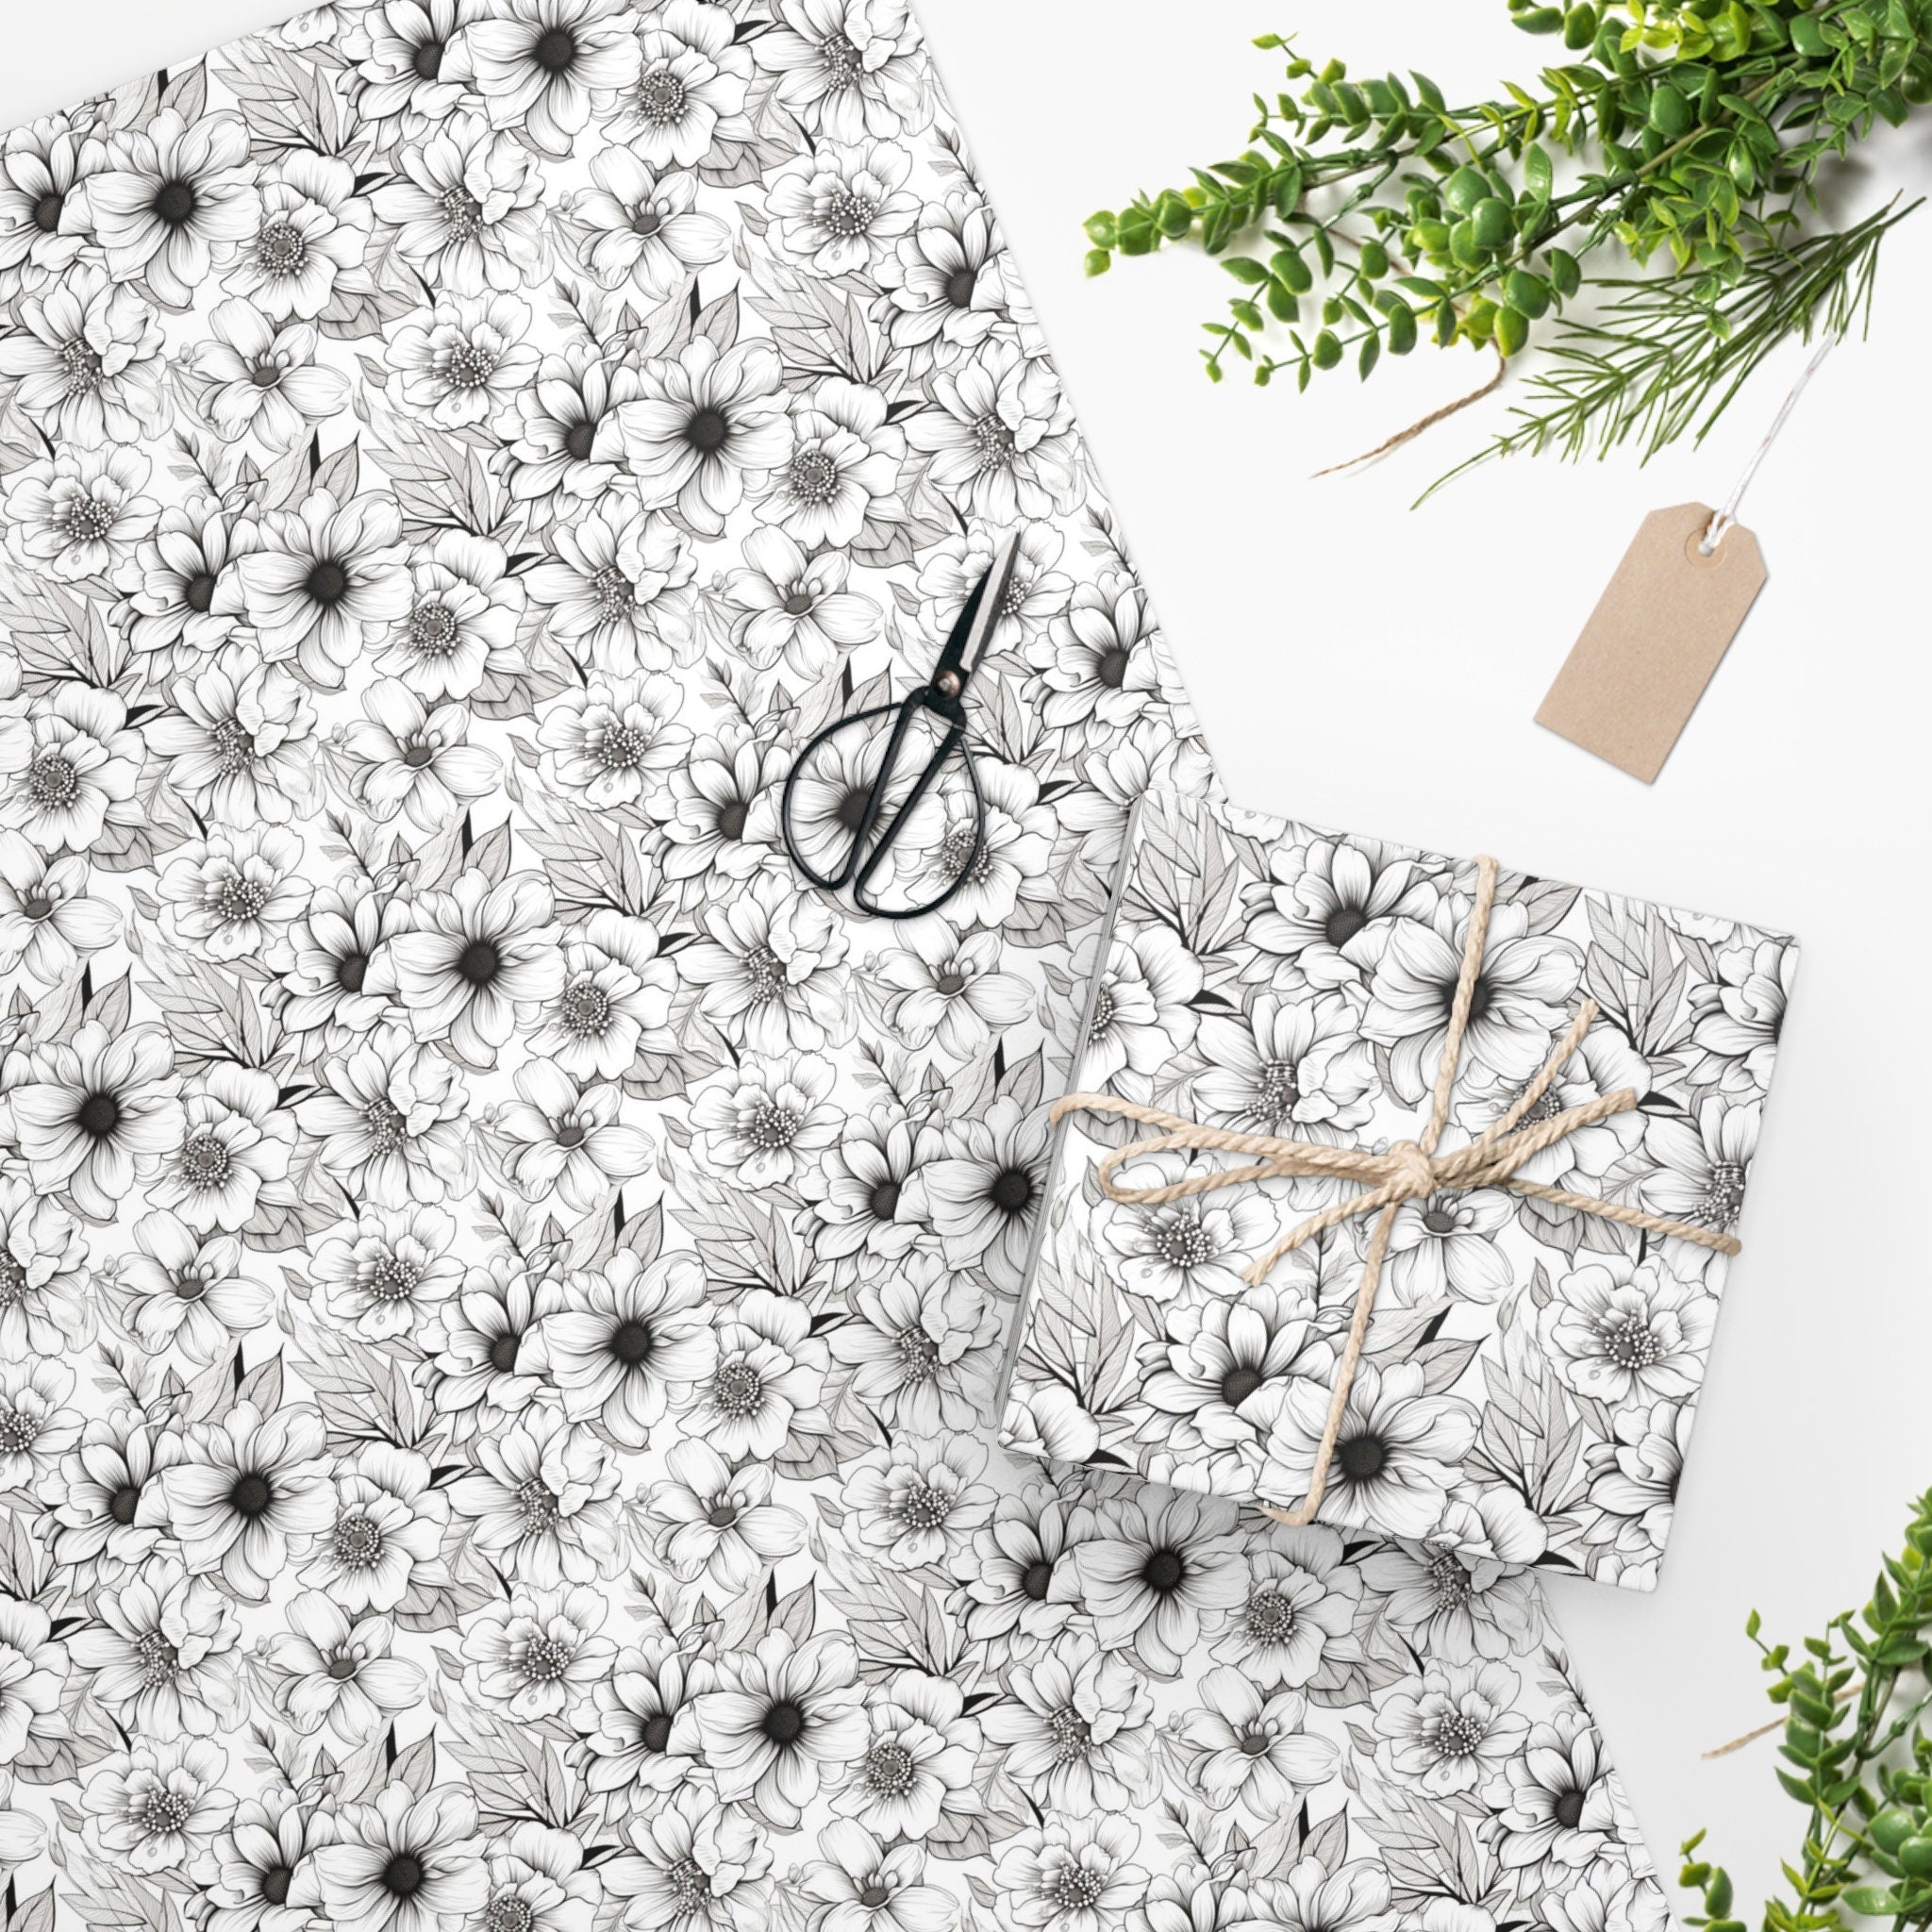 Black and White Floral Design Wrapping Paper, Wedding, Anniversary, Friendship Gifts